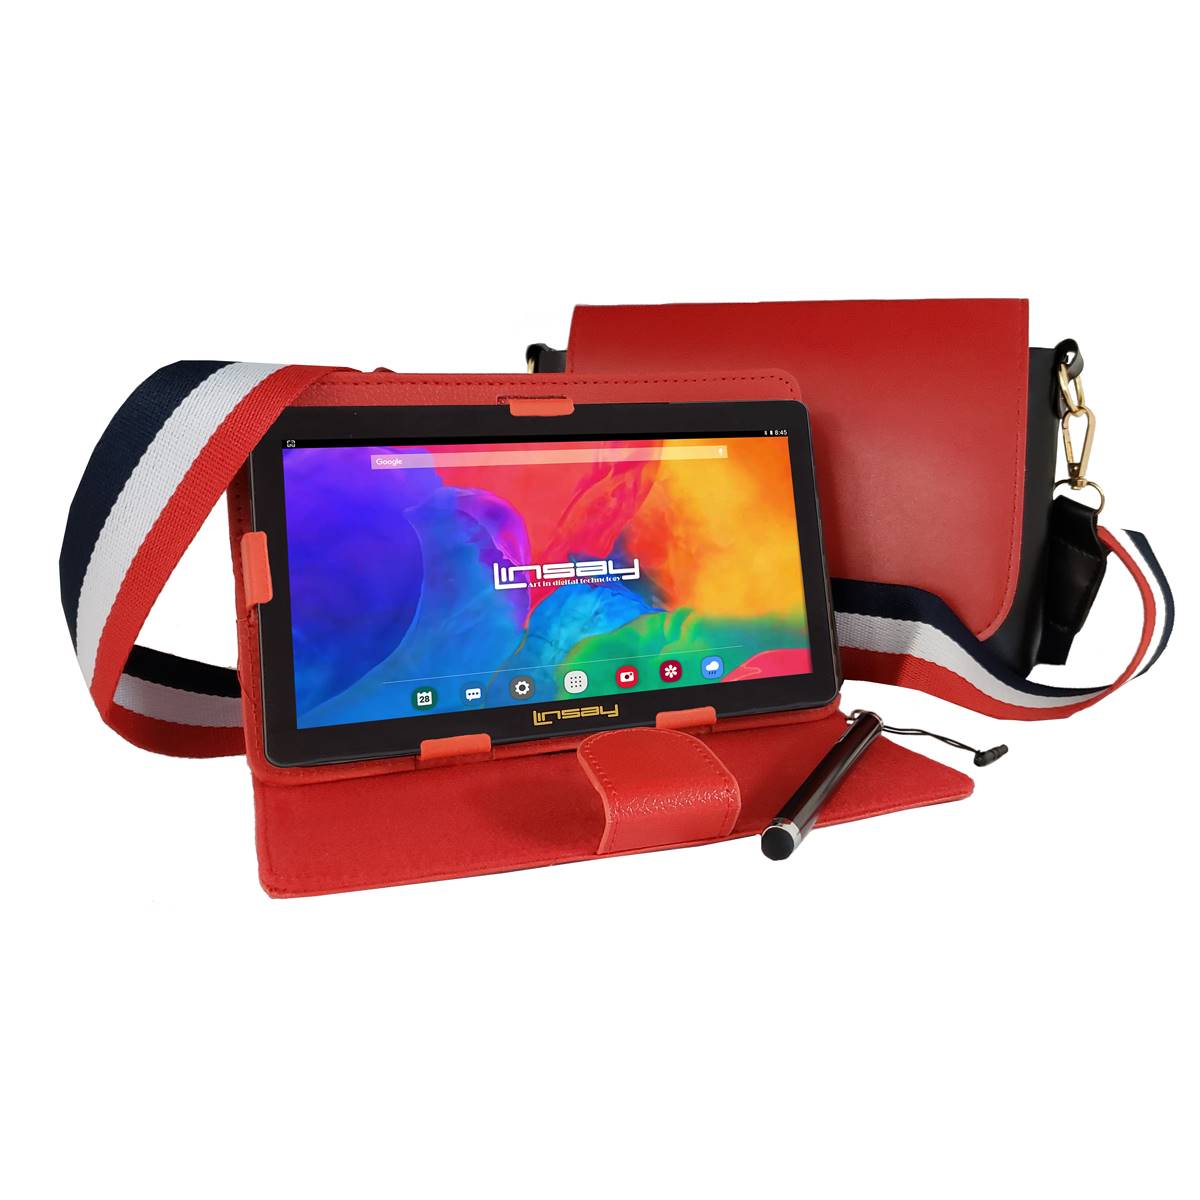 Linsay 7in. Quad Core Tablet With Fashion Cool Handbag